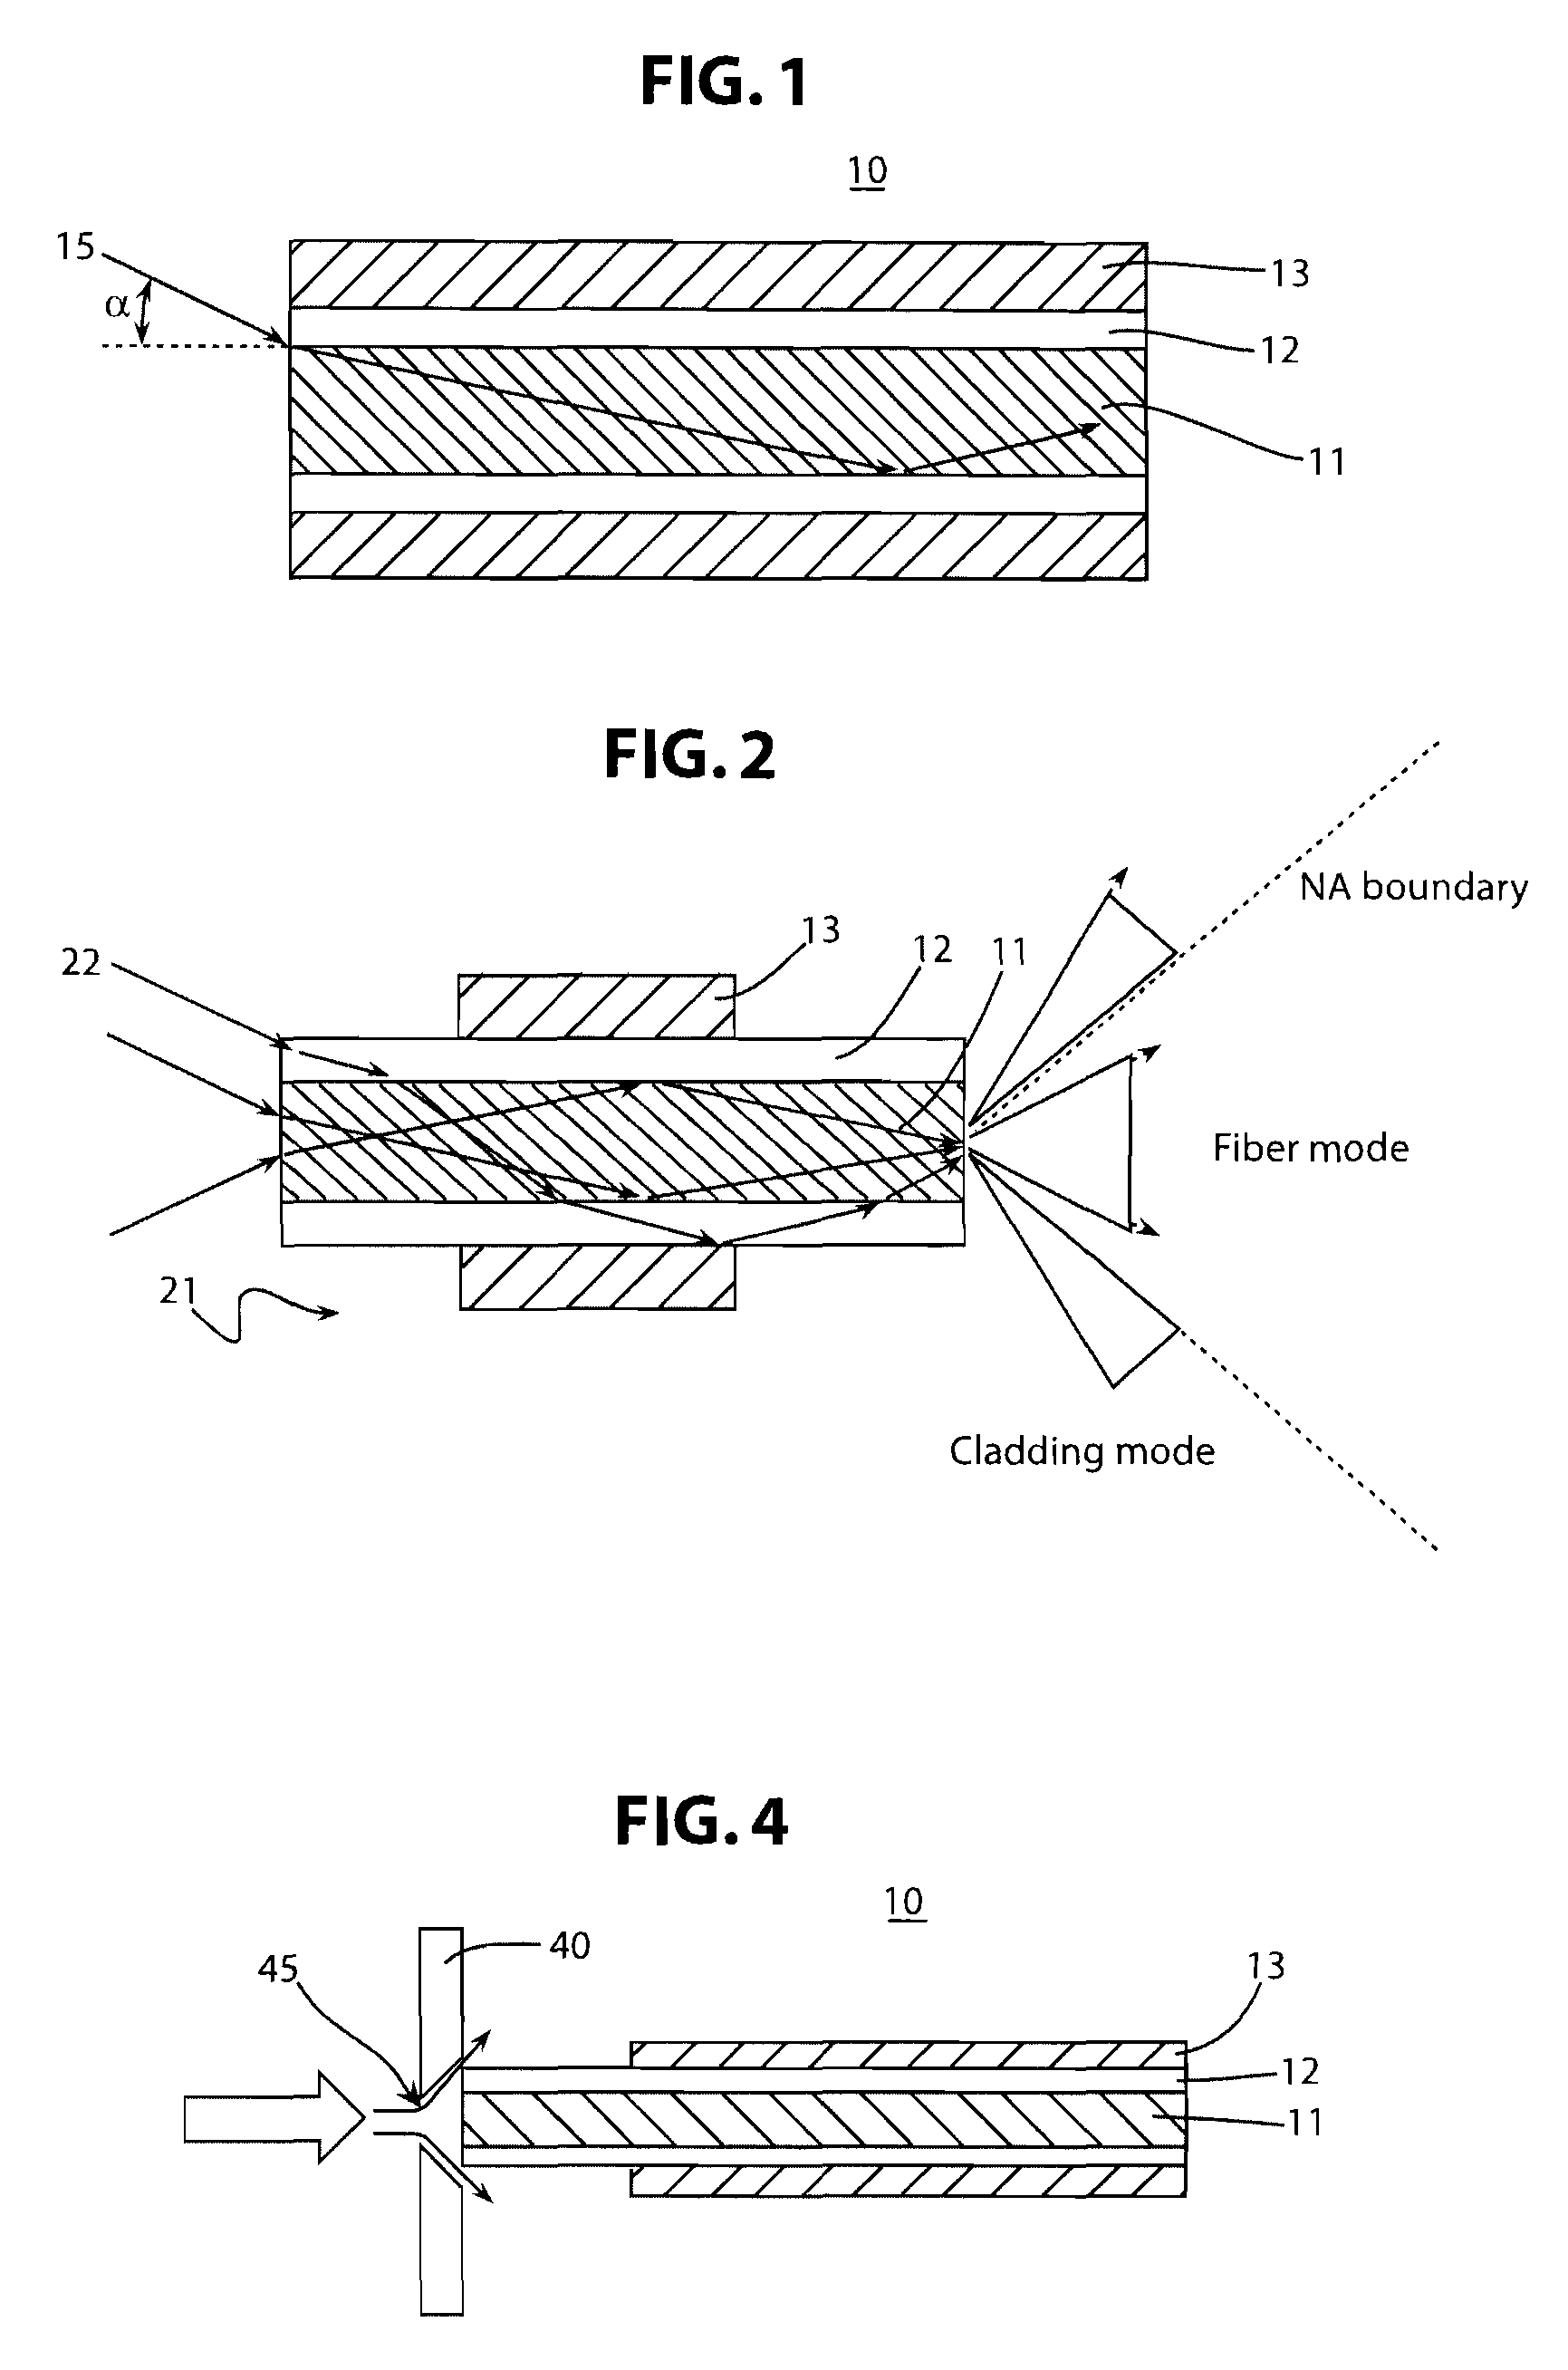 Fiber delivery system with enhanced passive fiber protection and active monitoring